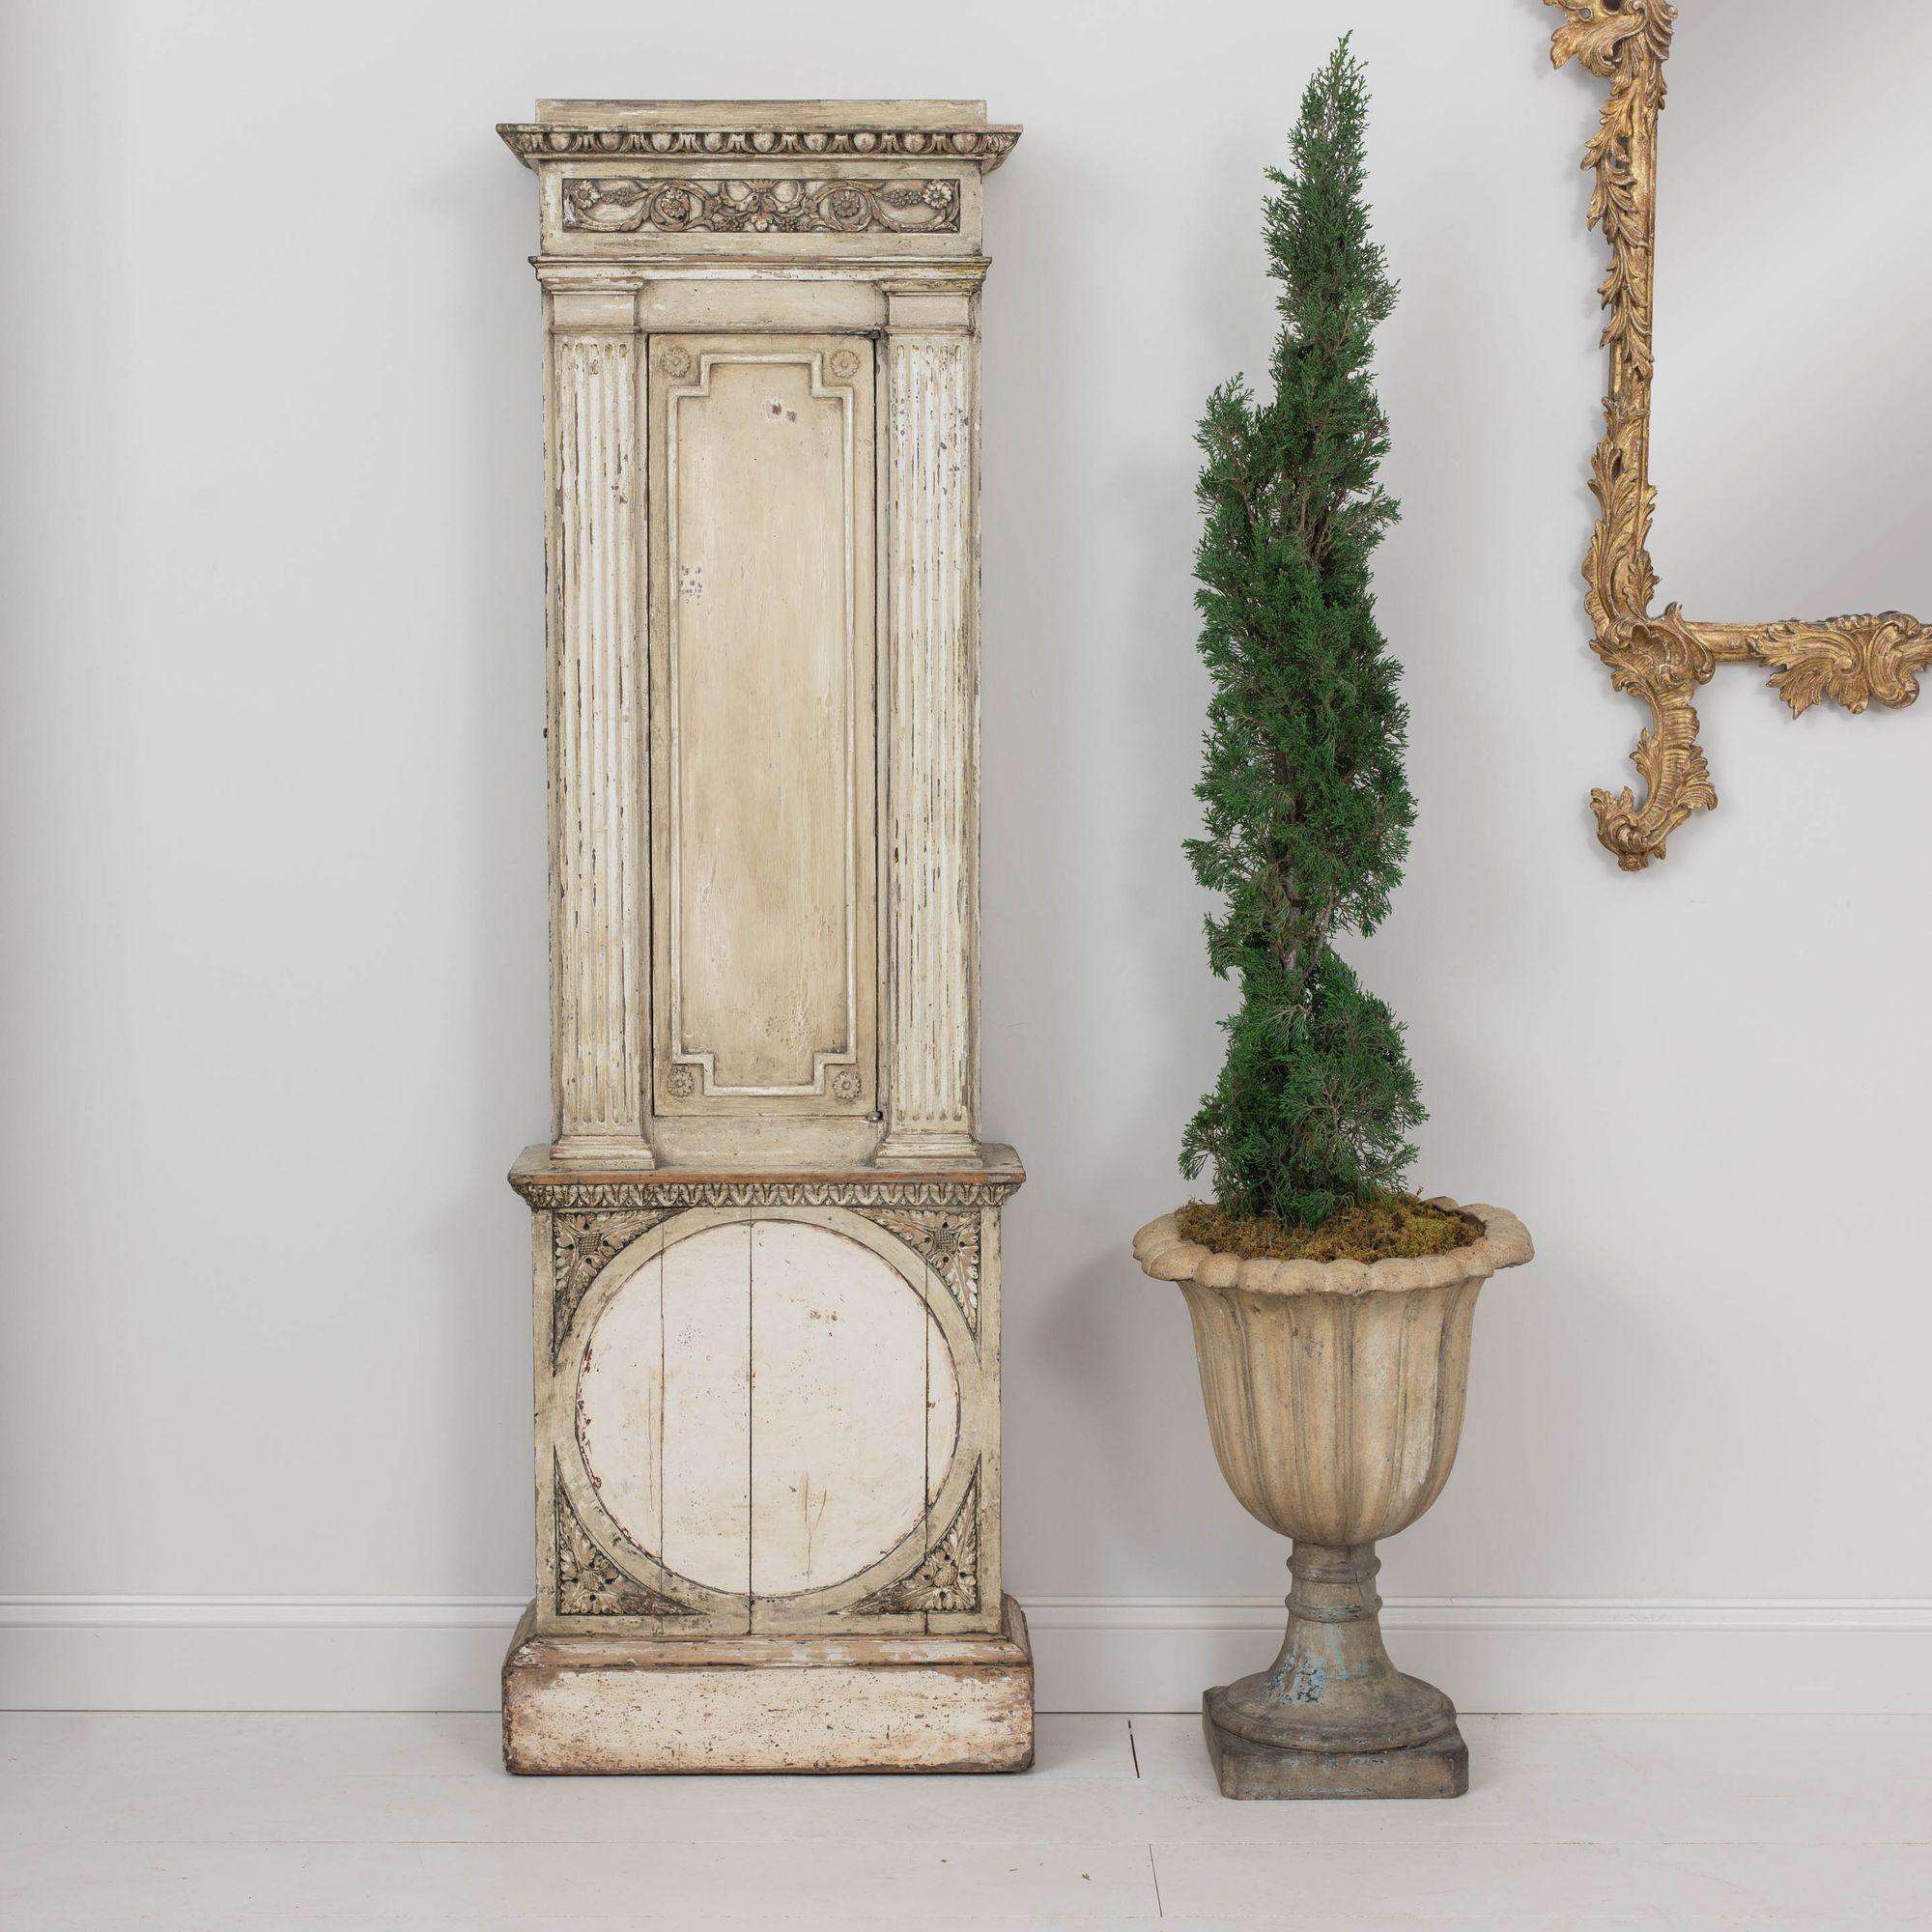 A 19th century Swedish pilaster cupboard from the Gustavian period in hand-scraped, original paint. This charming cupboard was formerly a tall case clock and has been fitted with shelves.